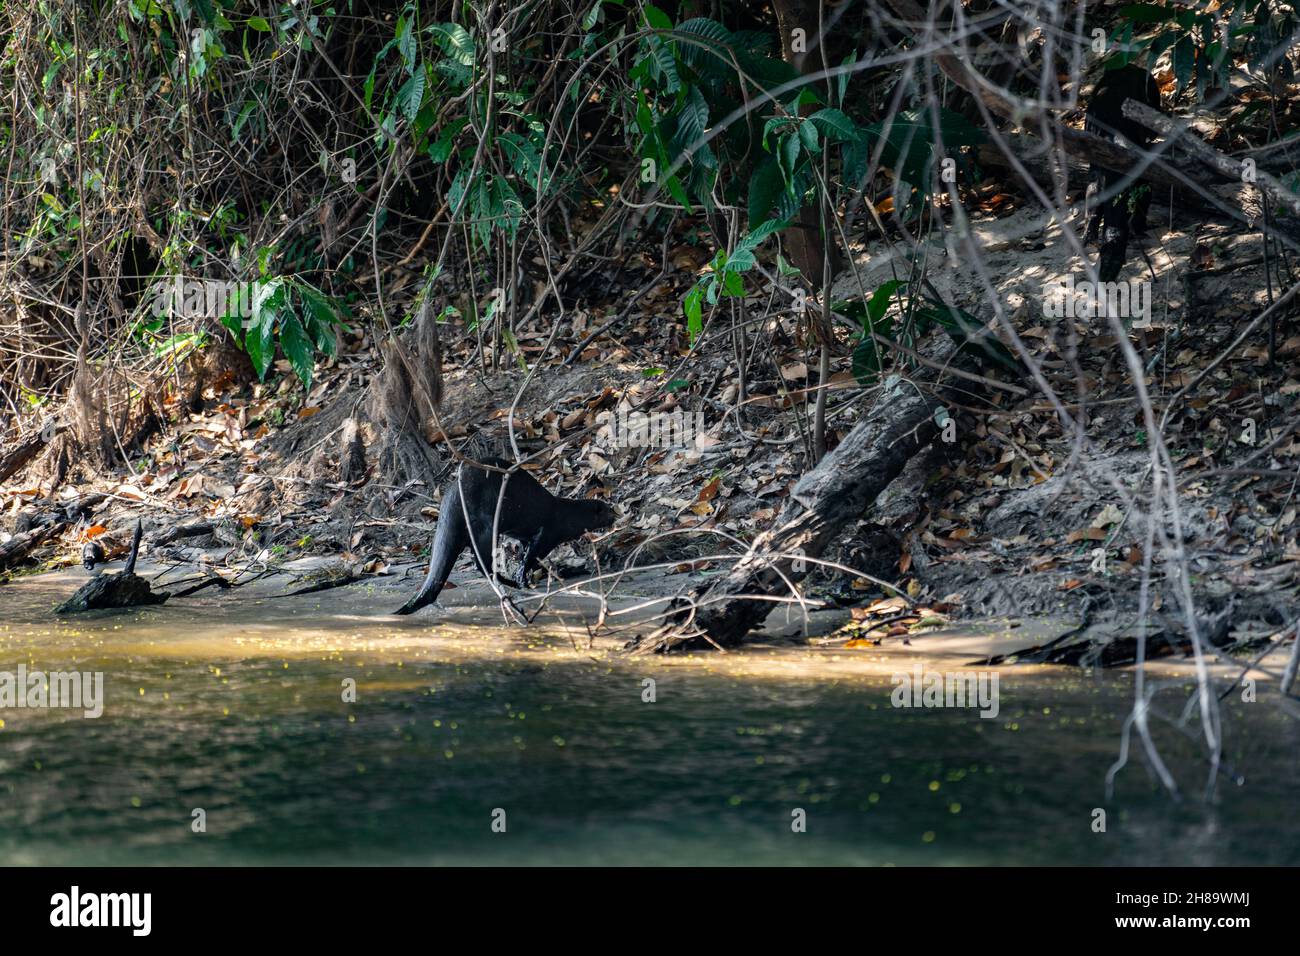 Giant Otters fishing in the Cristalino river in the Mato Grosso state portion of the Amazon Stock Photo